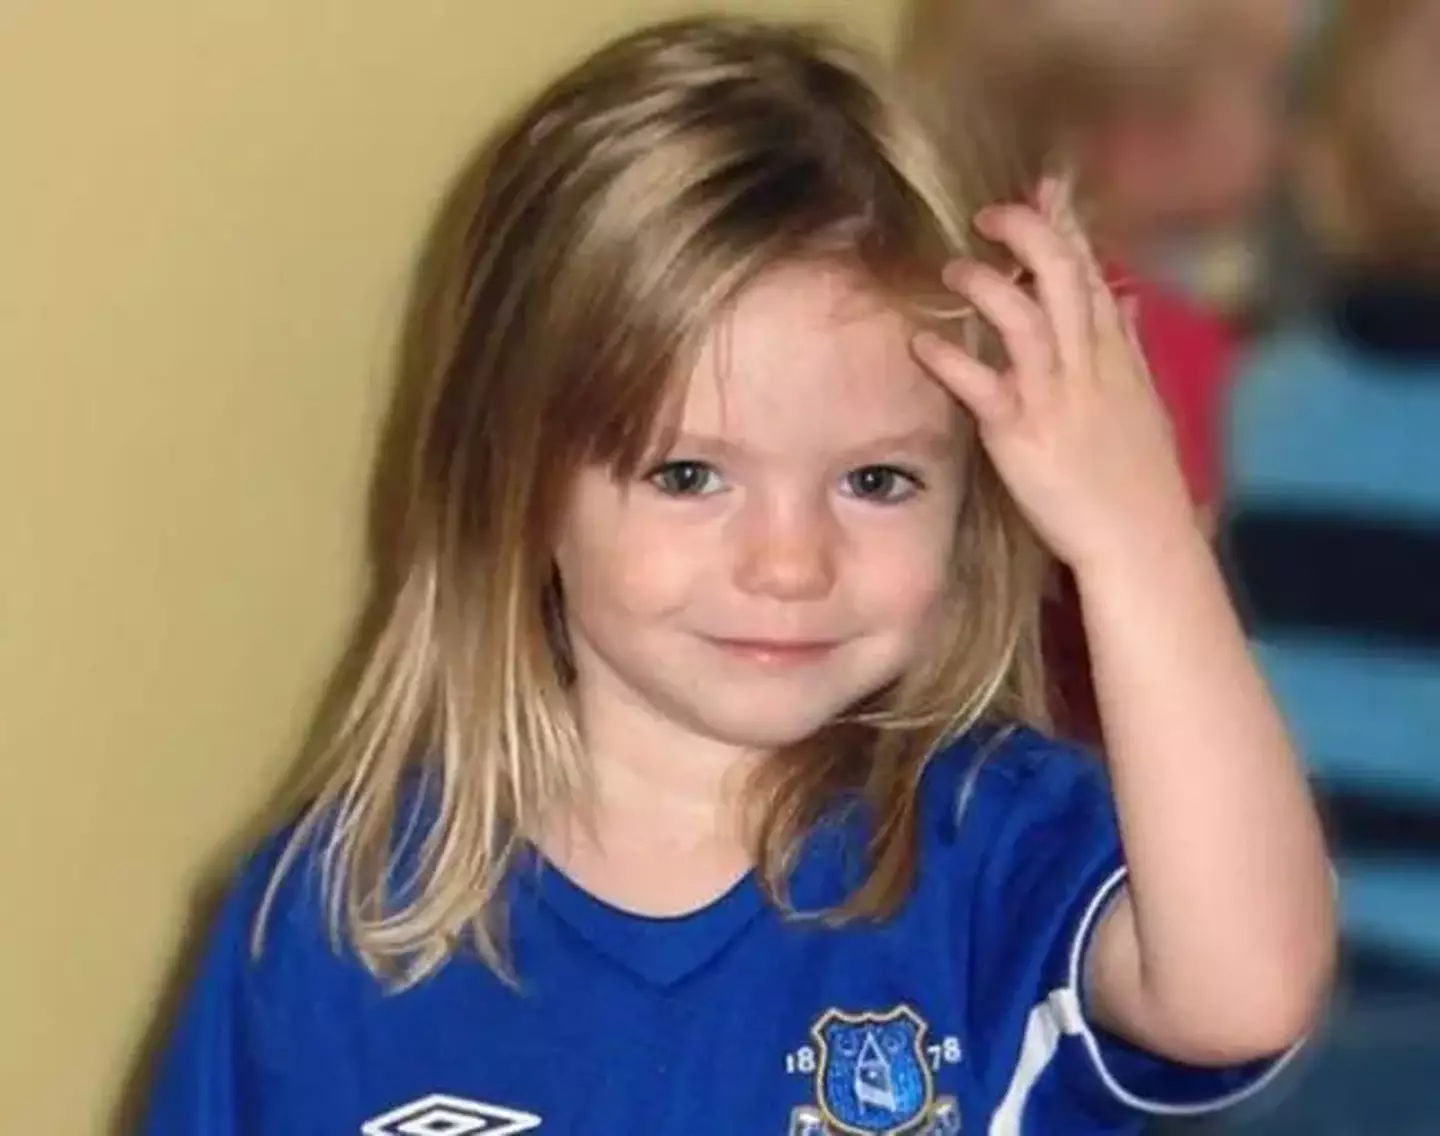 Madeleine was first reported missing on 3 May, 2007, while in Portugal with her parents.